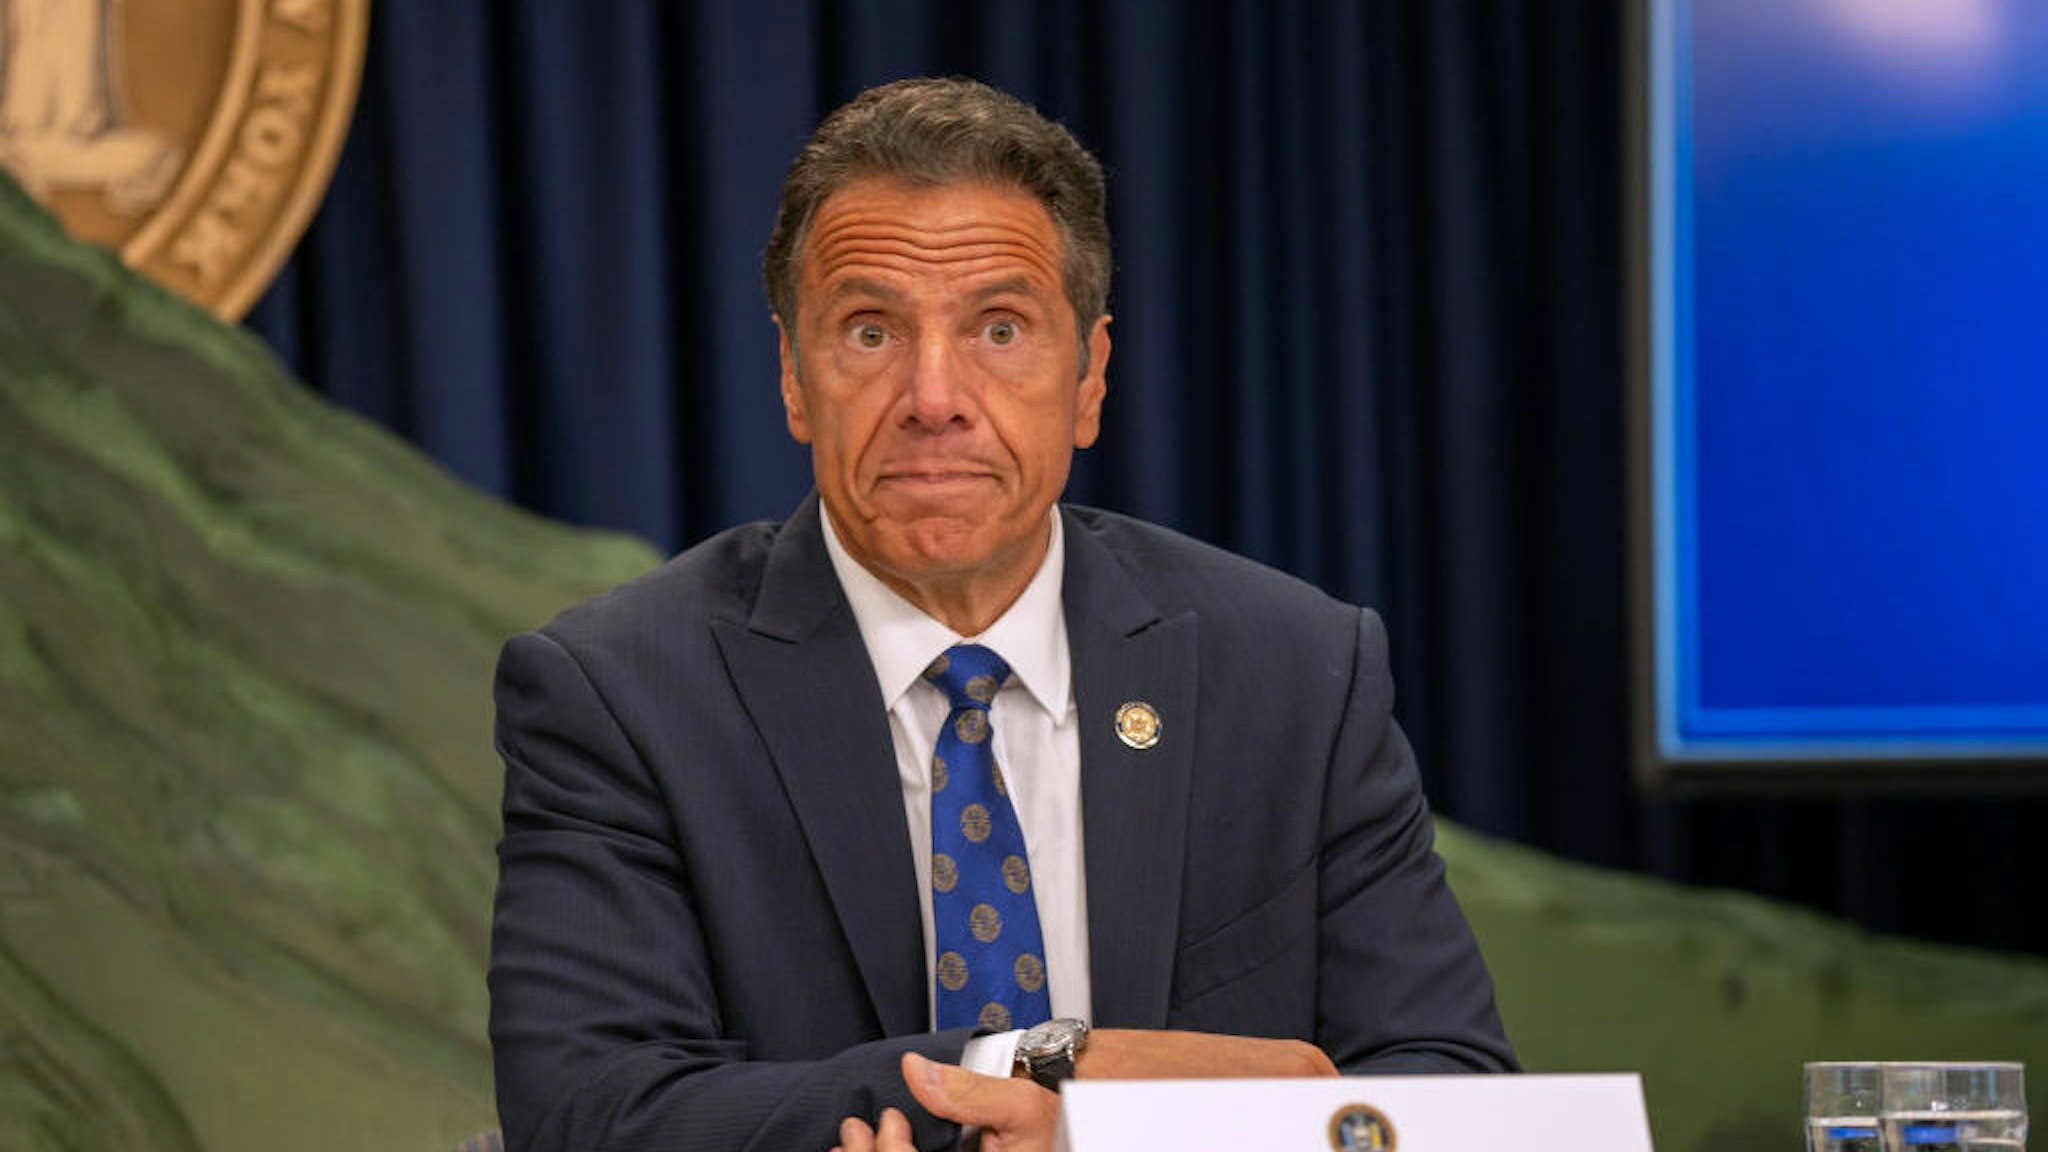 NEW YORK, NY - JULY 6: New York Governor Andrew Cuomo speaks during a COVID-19 briefing on July 6, 2020 in New York City. On the 128th day since the first confirmed case in New York and on the first day of phase 3 of the reopening, Gov. Cuomo asked New Yorkers to continue to be smart while siting the rise of infections in other states. (Photo by David Dee Delgado/Getty Images)